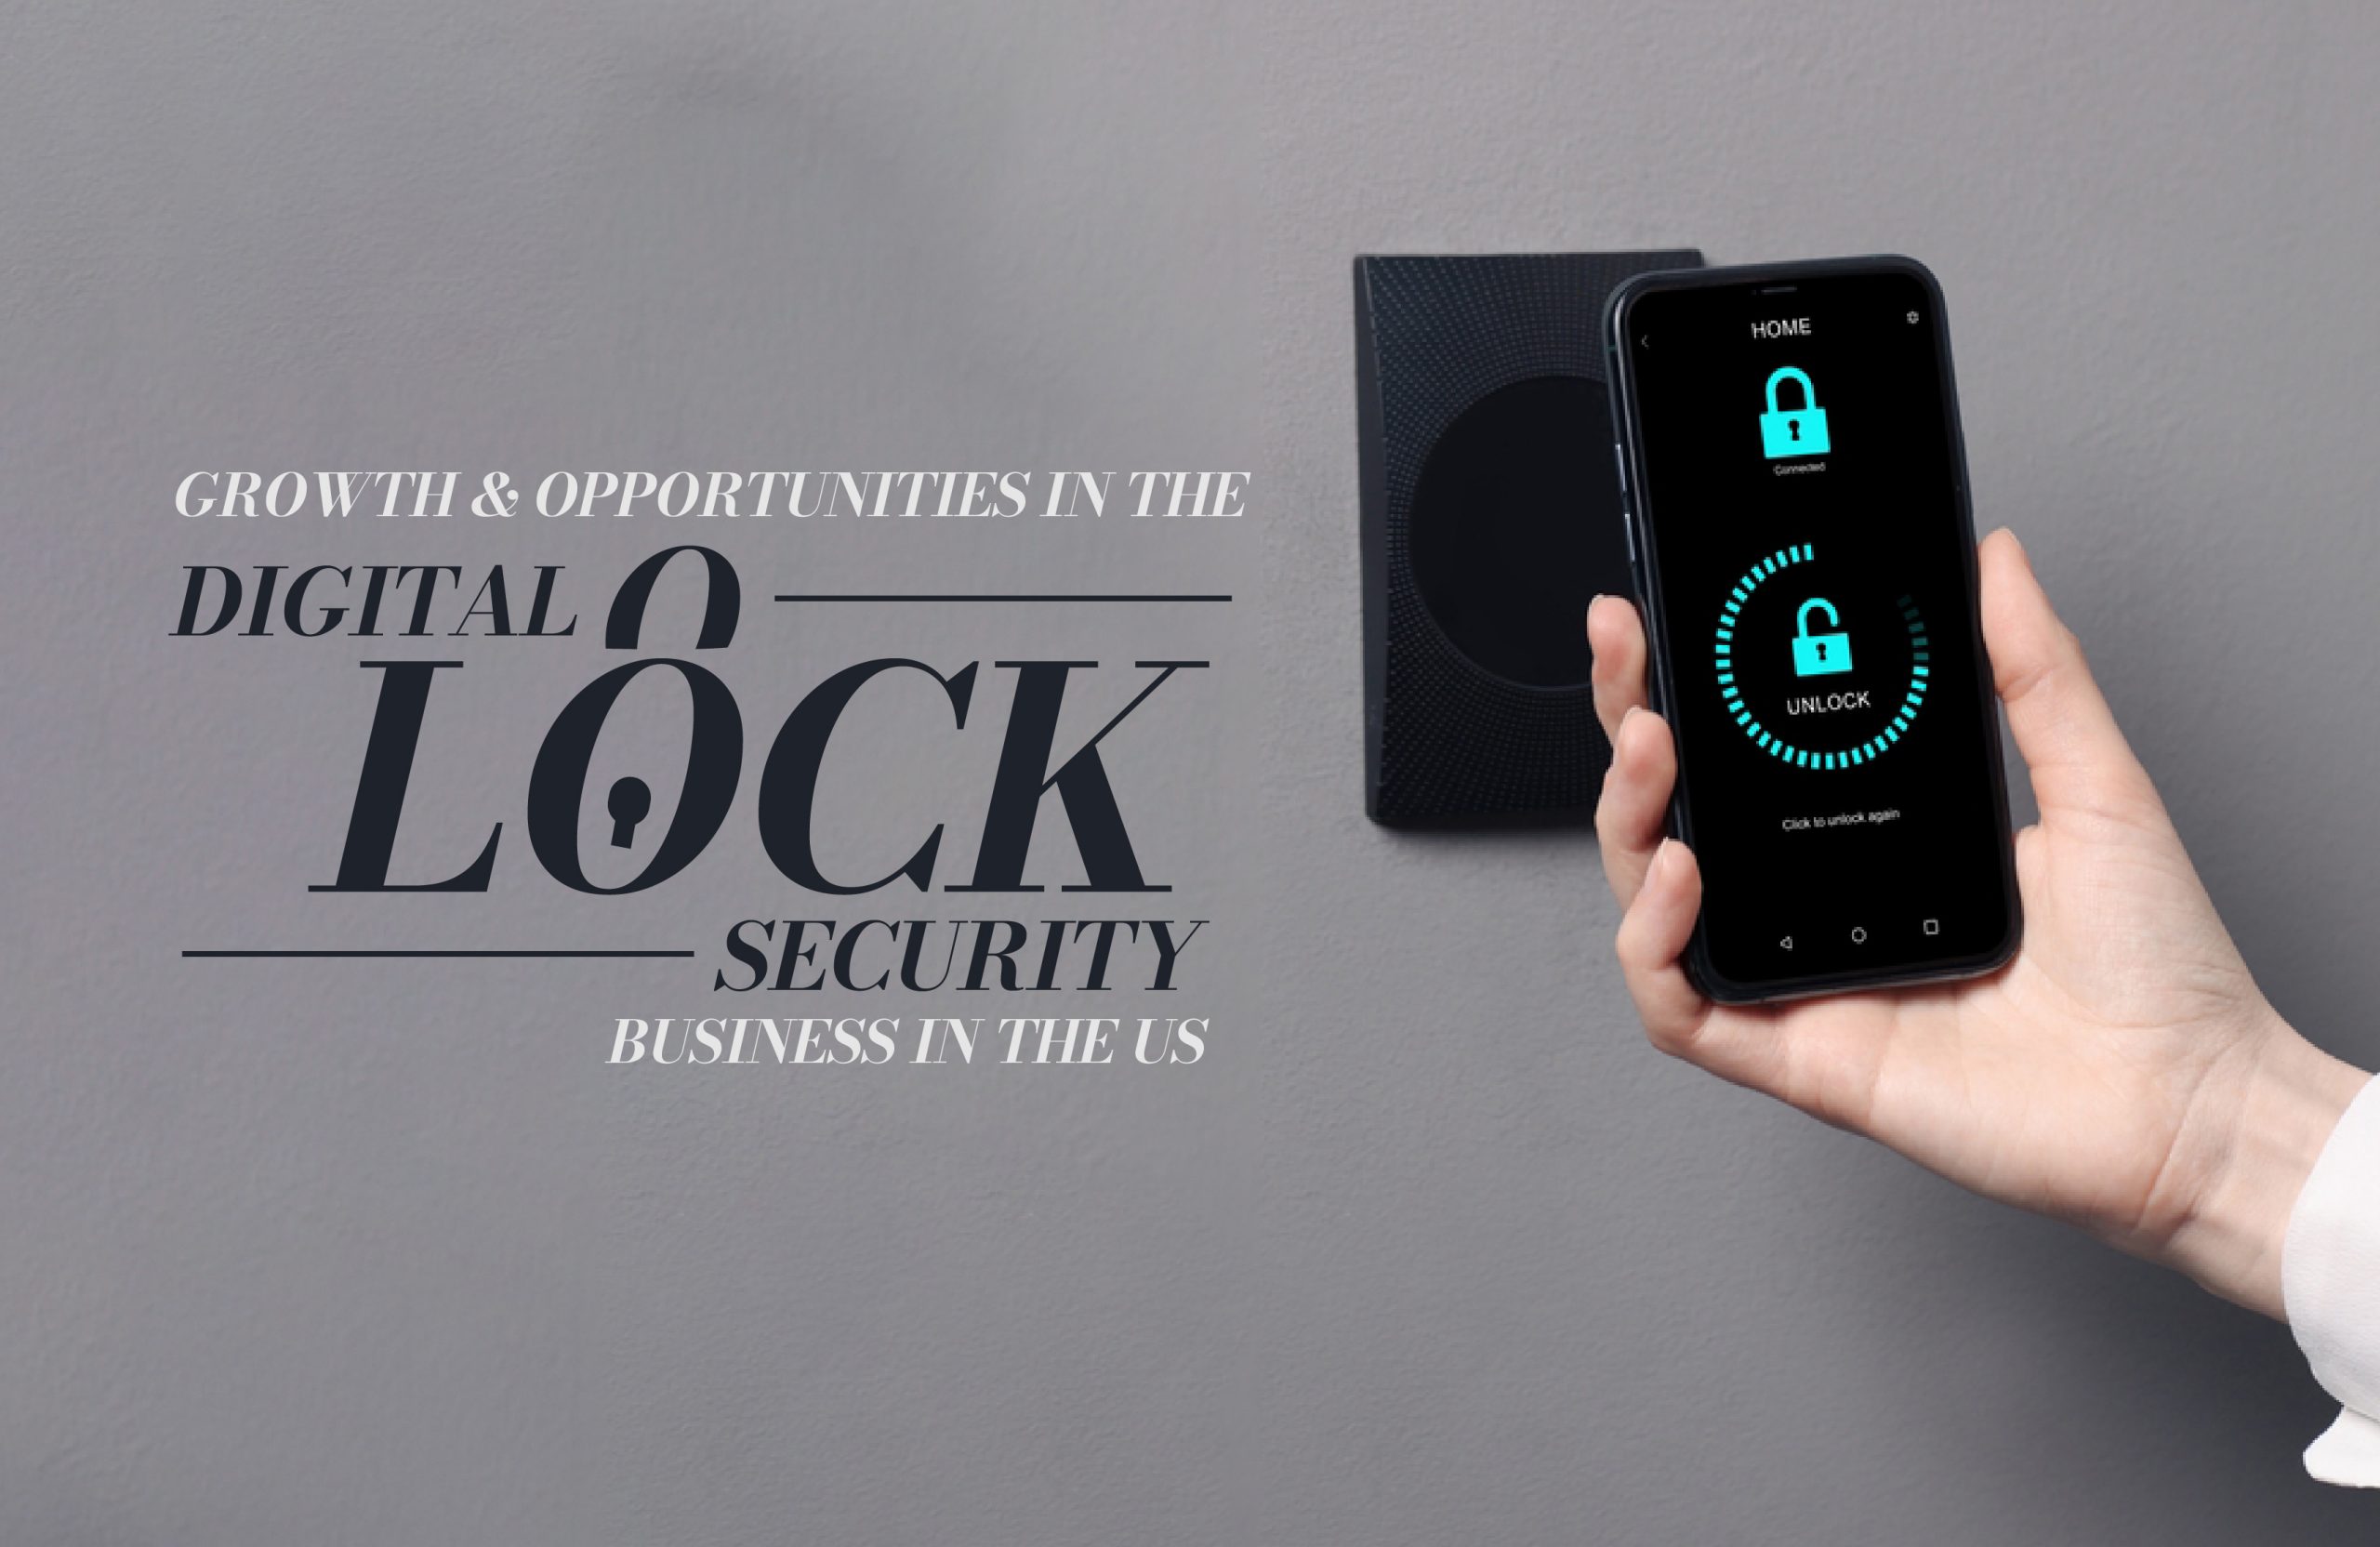 The Digital Lock Security Business in the US